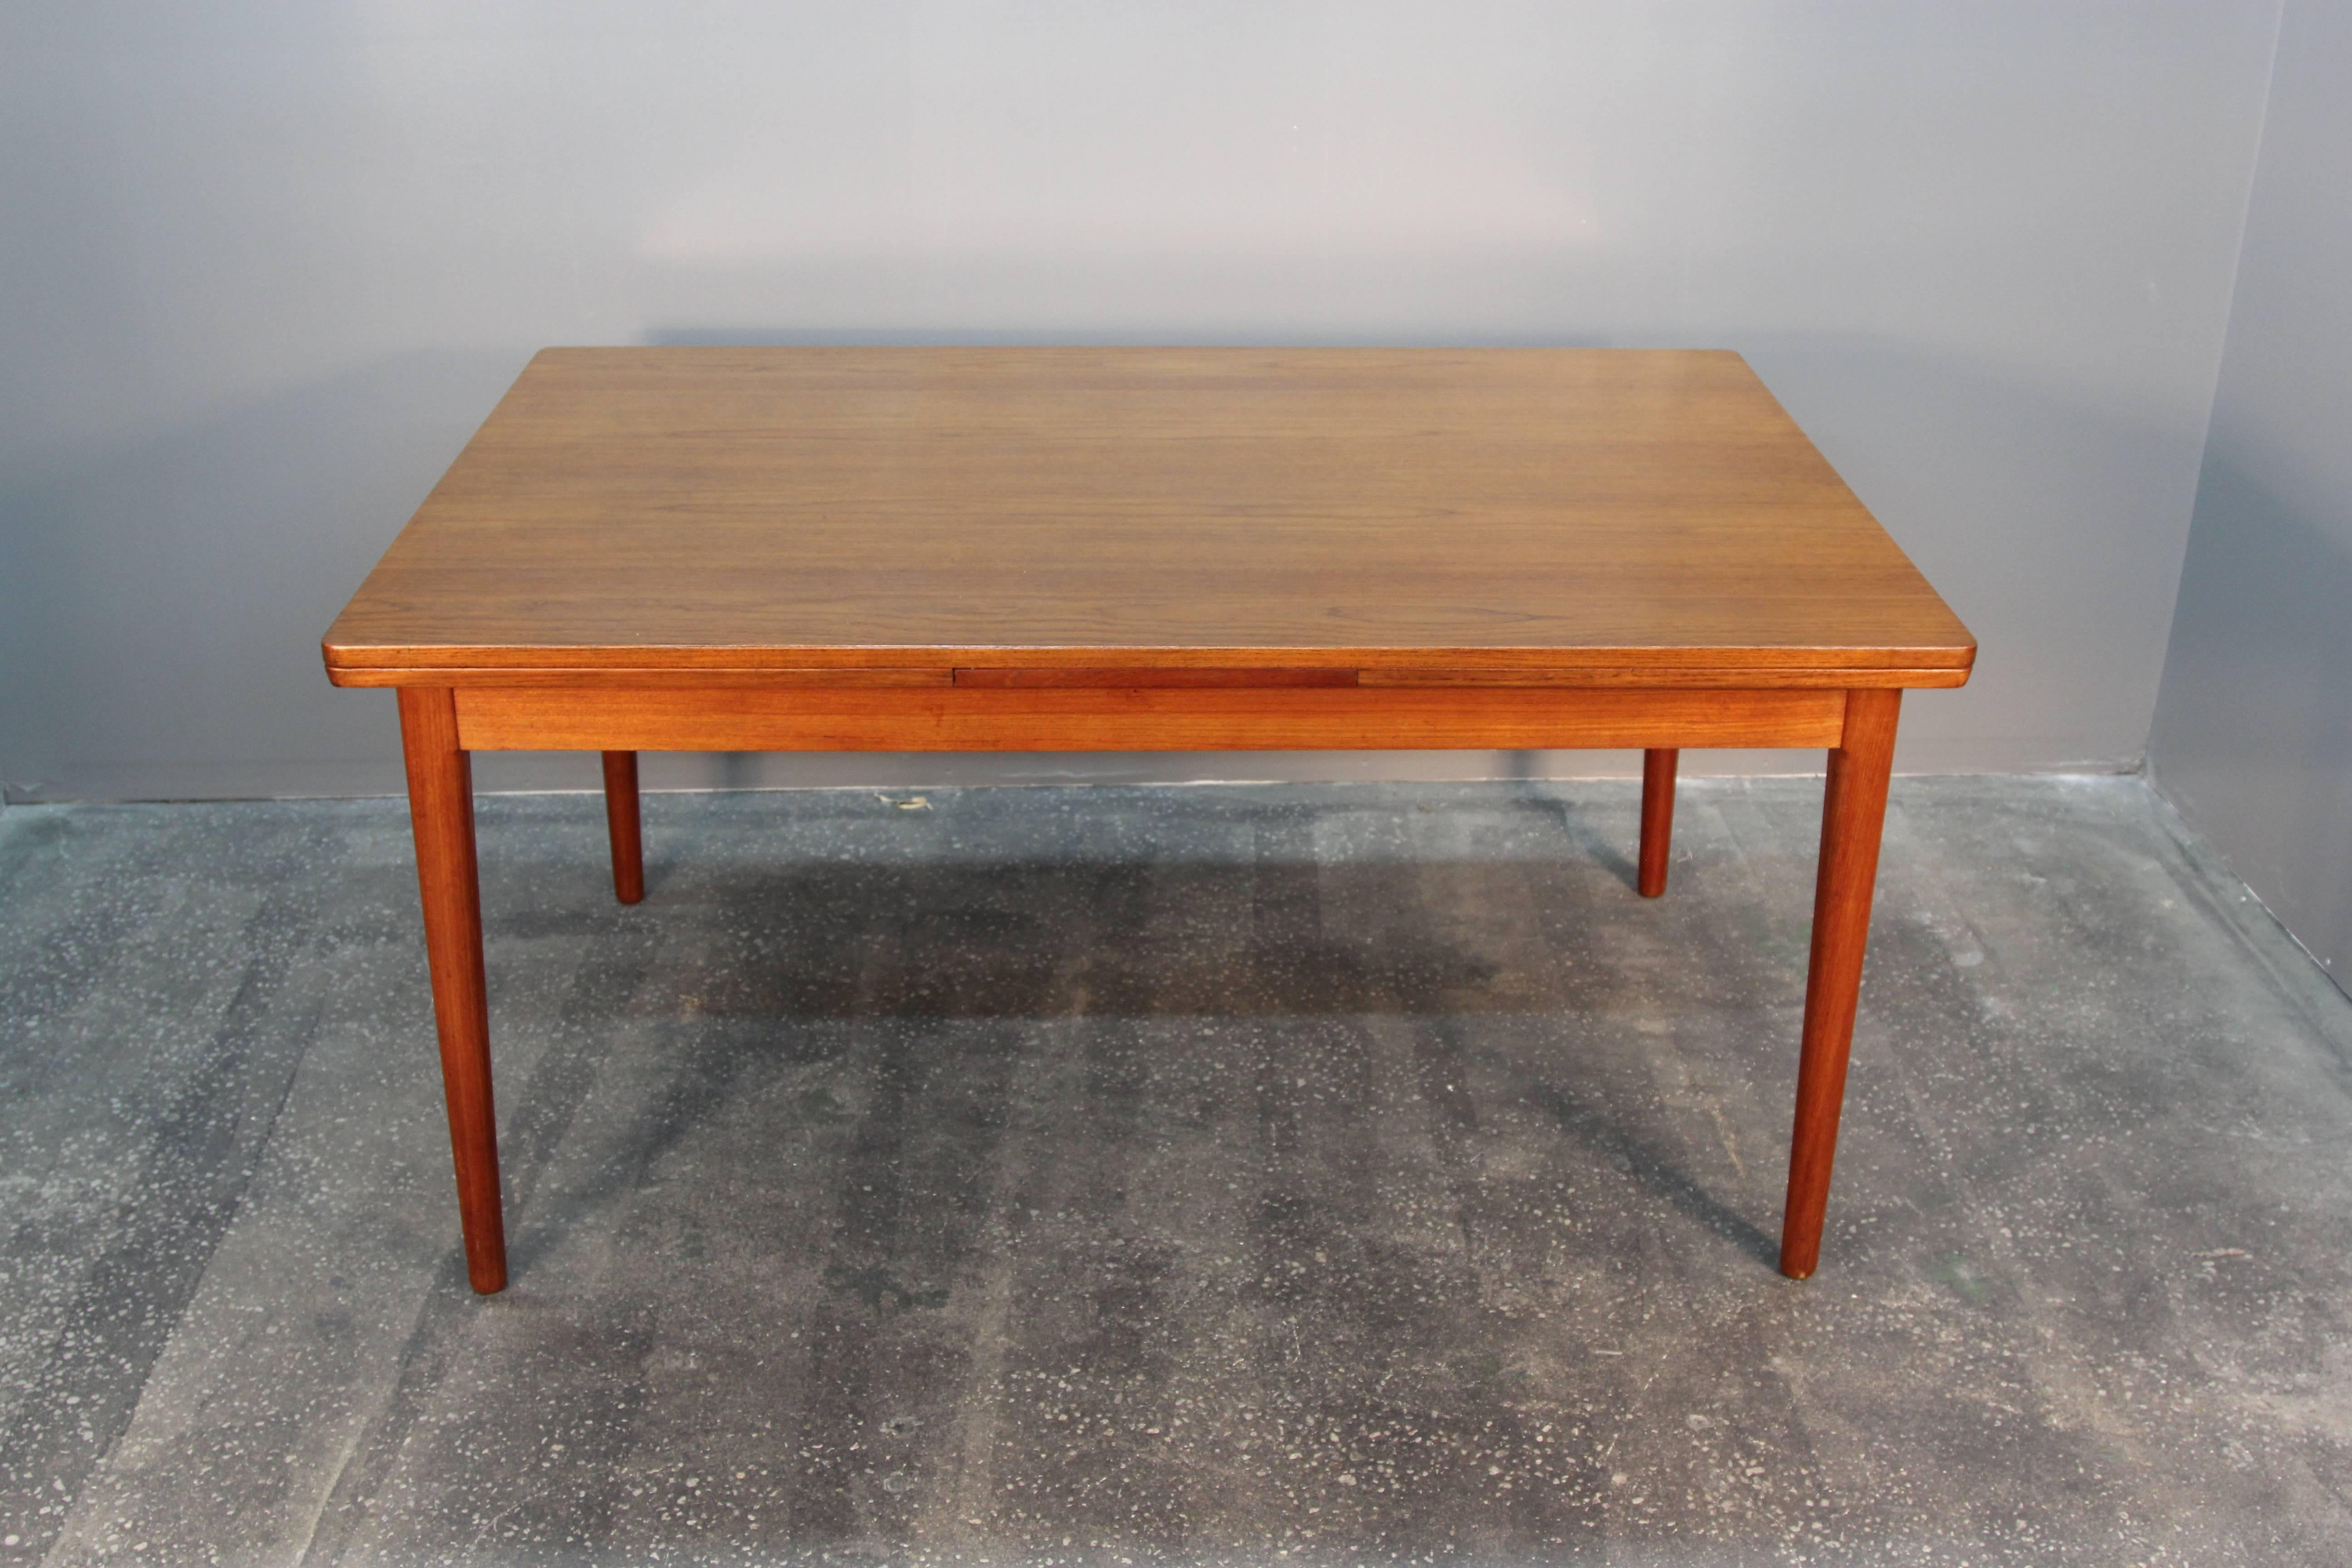 Incredible model 12 teak dining table by Niels O. Møller. Excellent condition. Two hidden extensions easily pull-out to create full length 10-12 person dining table. Beautiful wood grain and rich color.